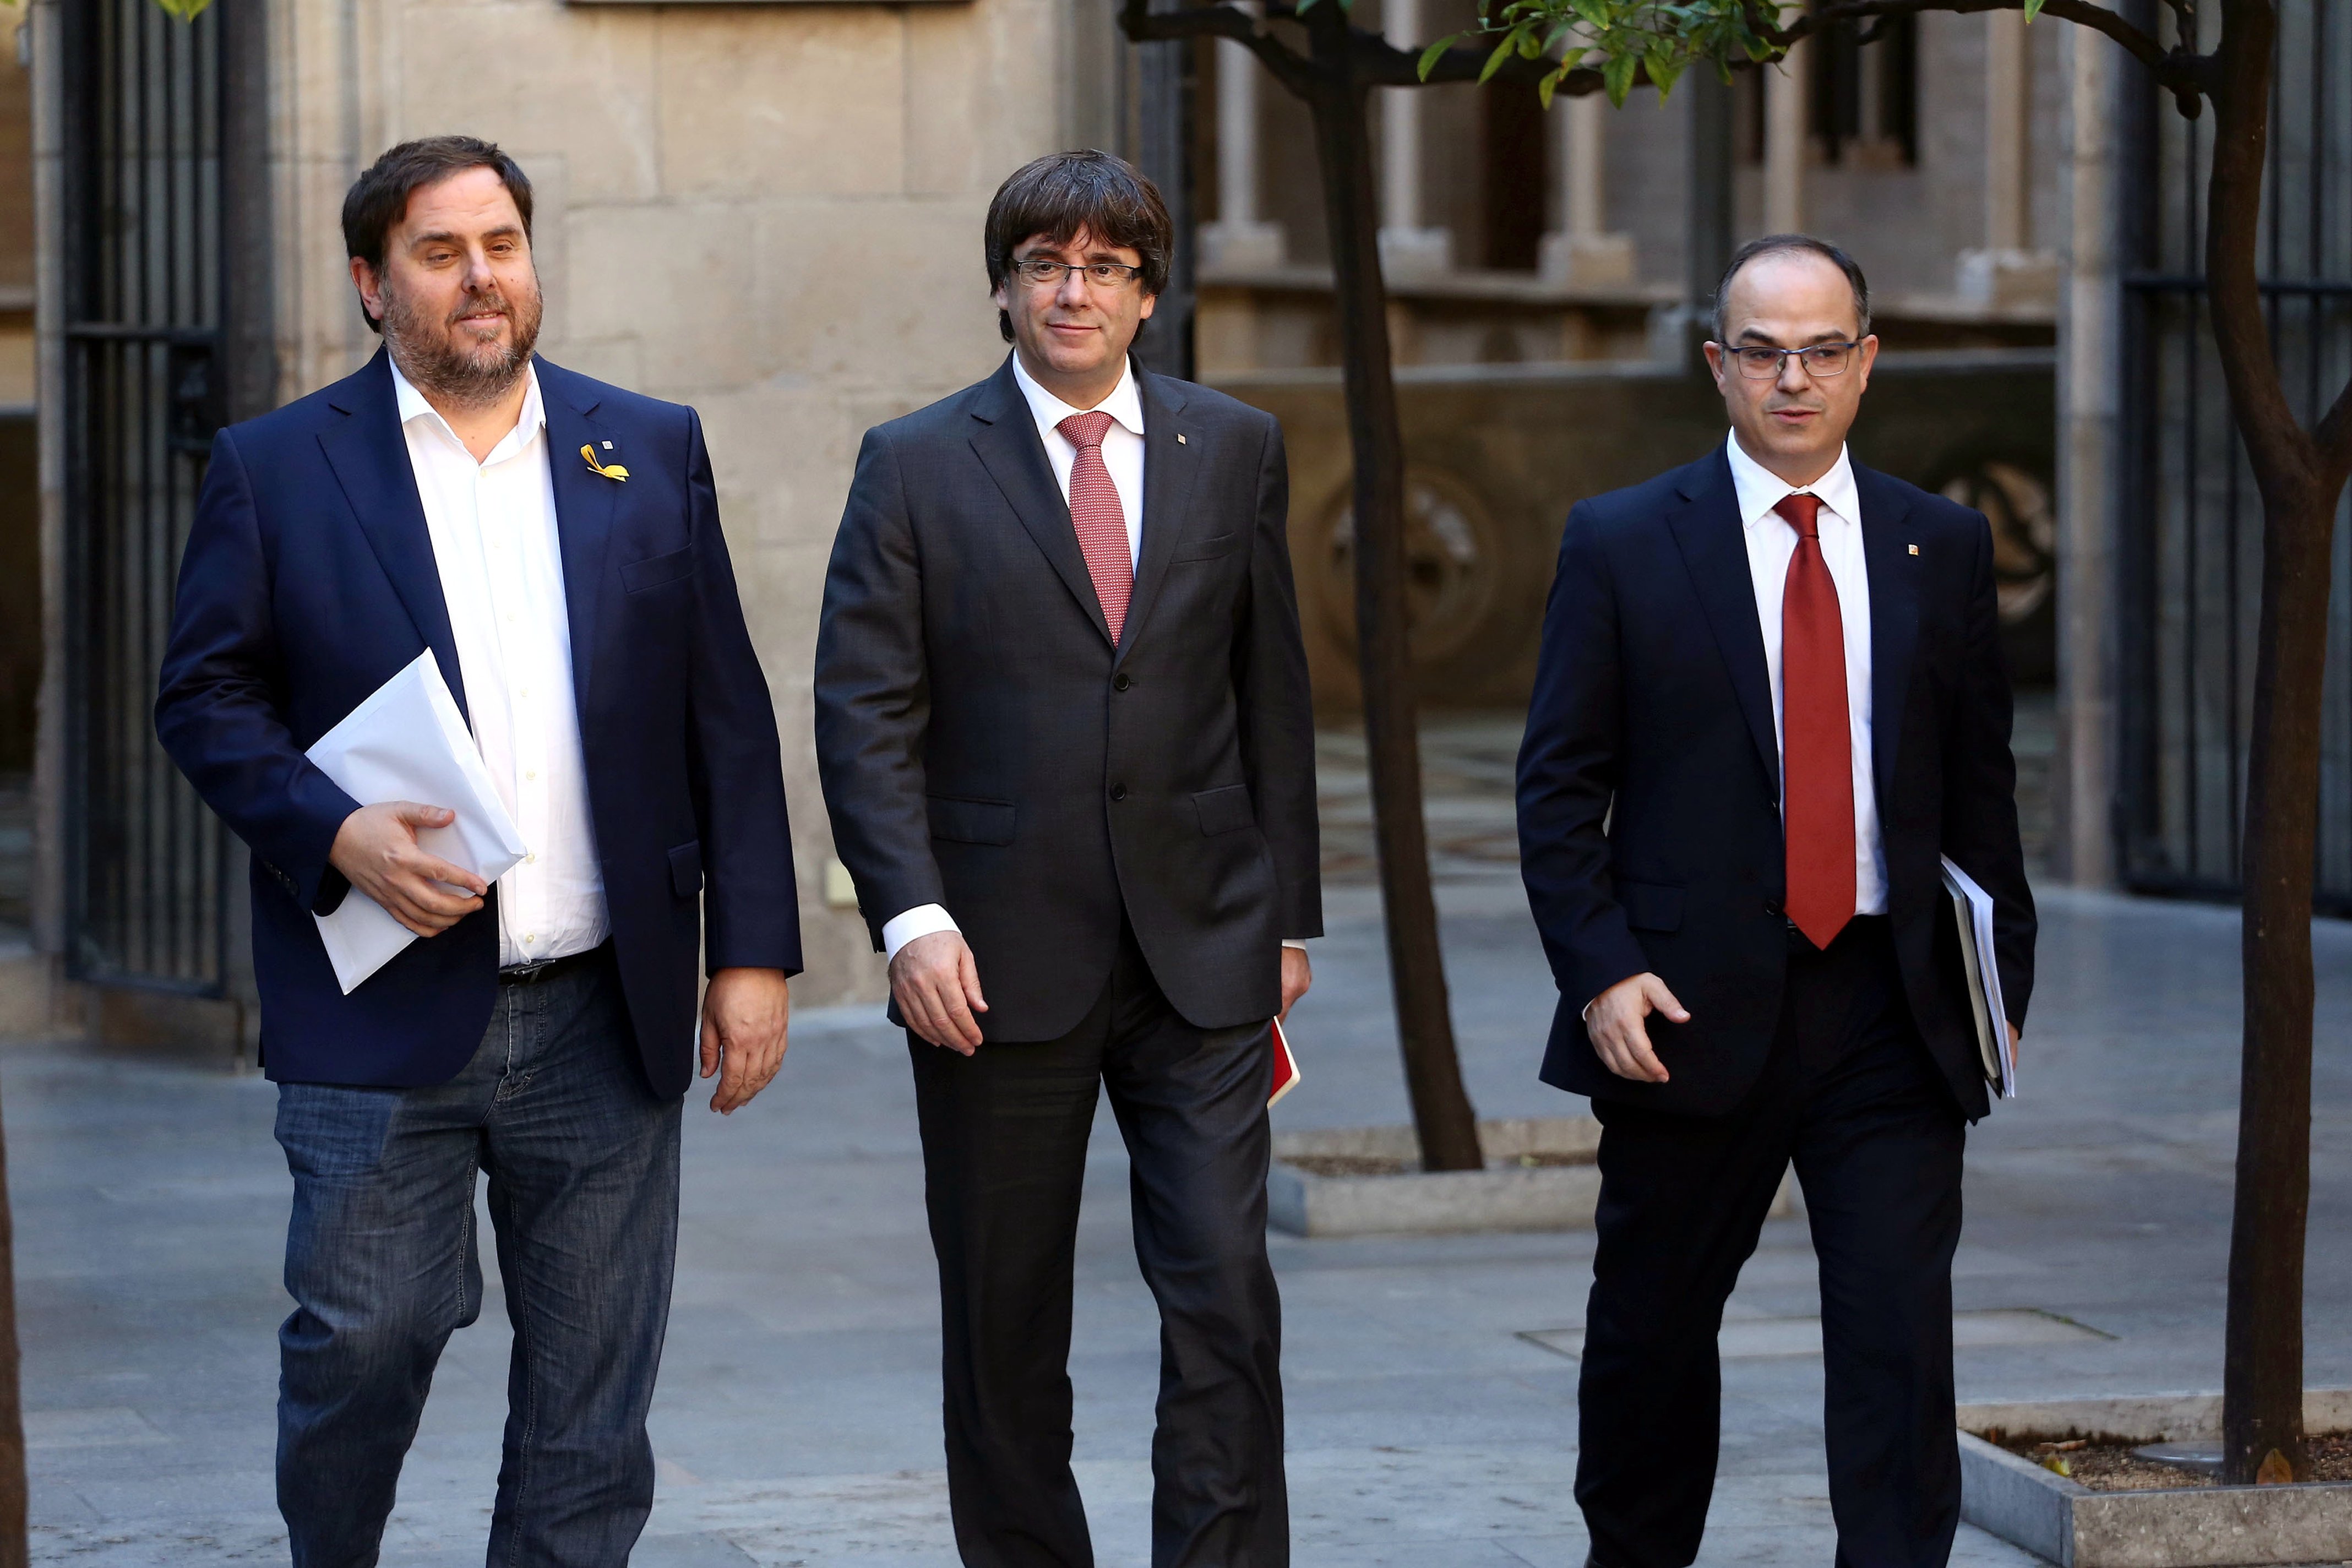 Survey: Puigdemont, Junqueras to win European Parliament seats, PSOE largest party in Spain